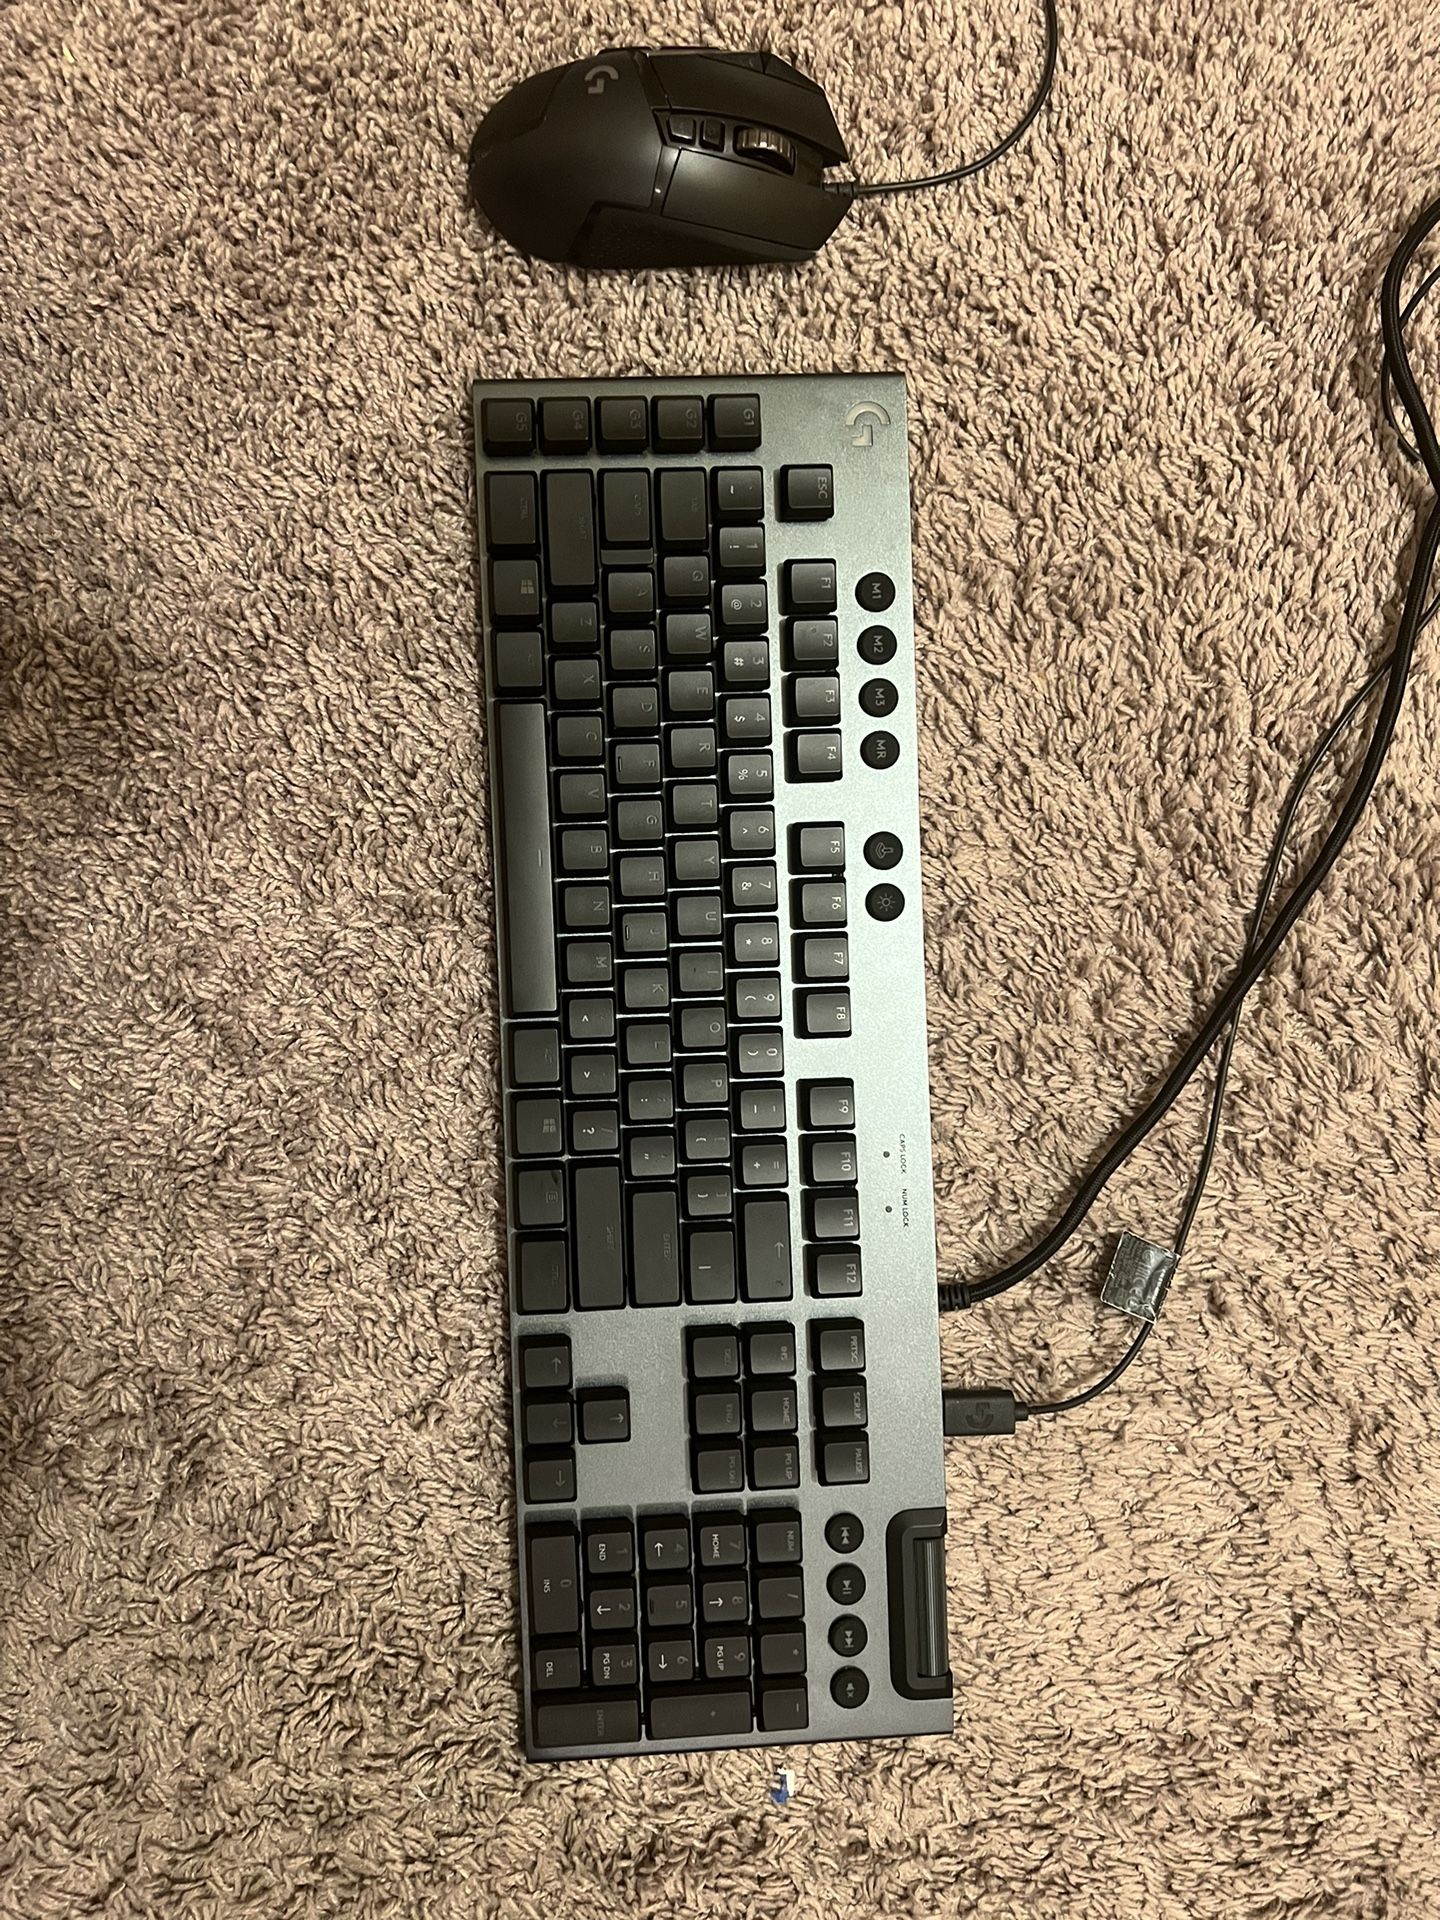 G 815, Like It Was Out Of The Box  Free Mouse